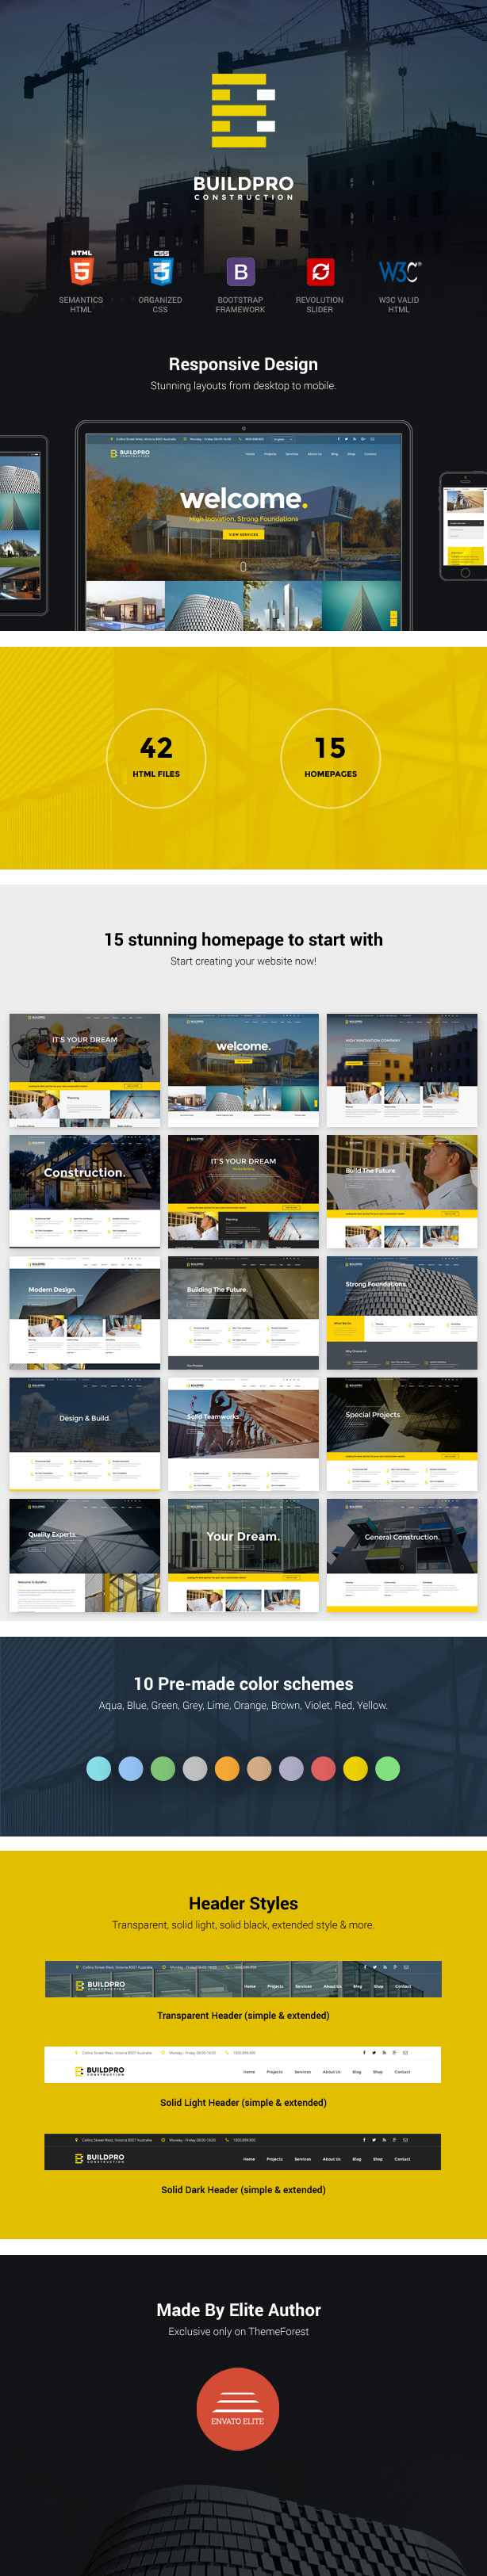 Construction and Building Website Template